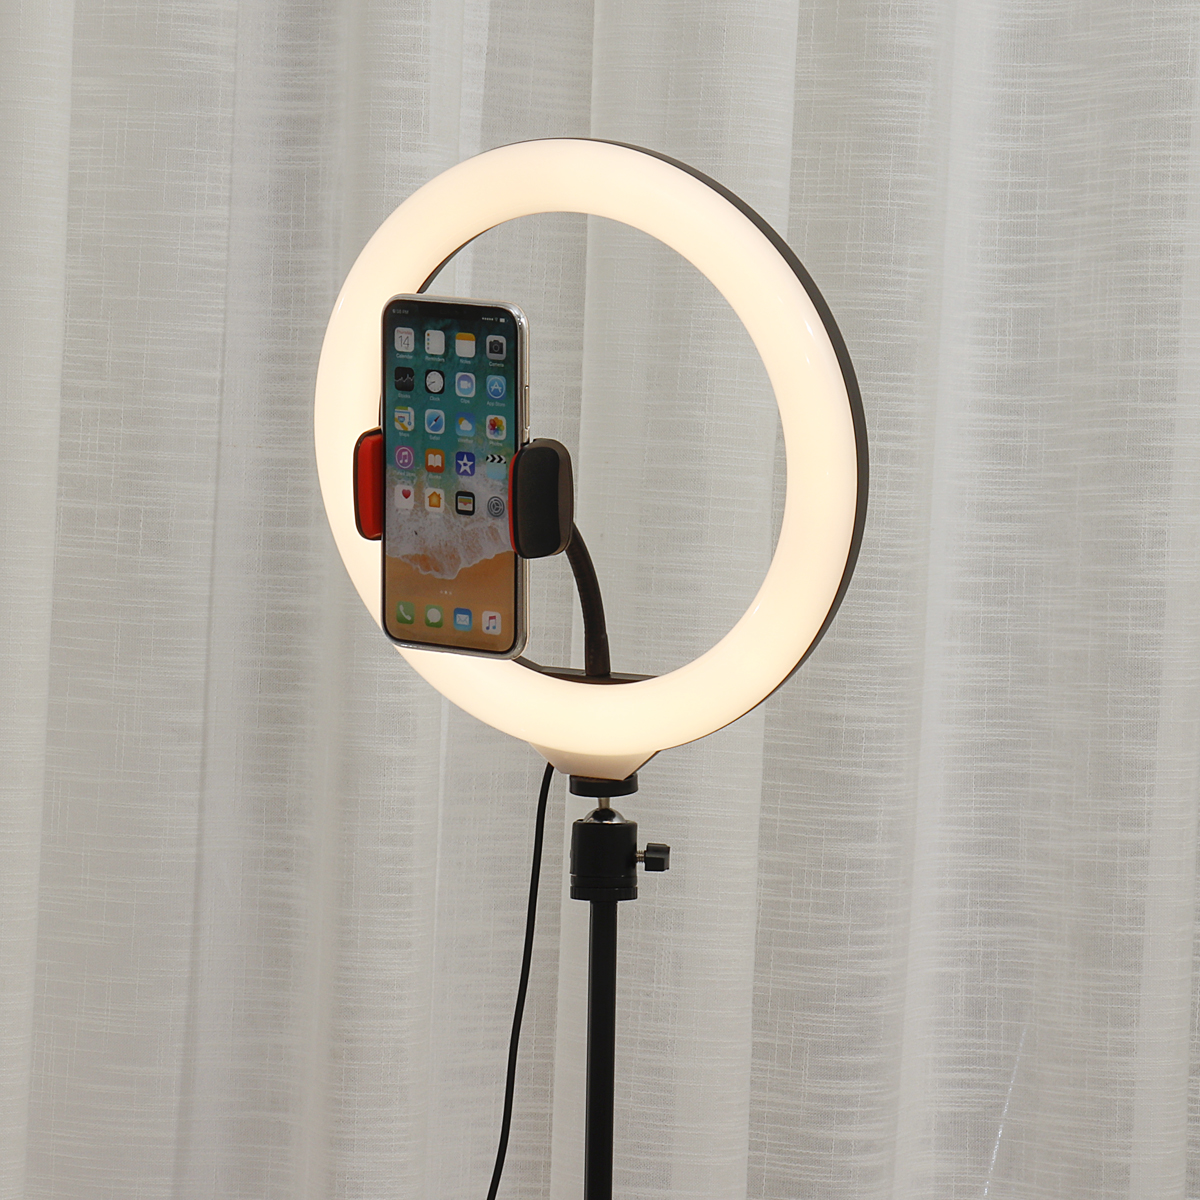 Bakeey-10inch-LED-Ring-Light-Portable-Telescopic-Tripod-Fill-Light-Dimmable-Flexible-Stand-Phone-Hol-1746941-9